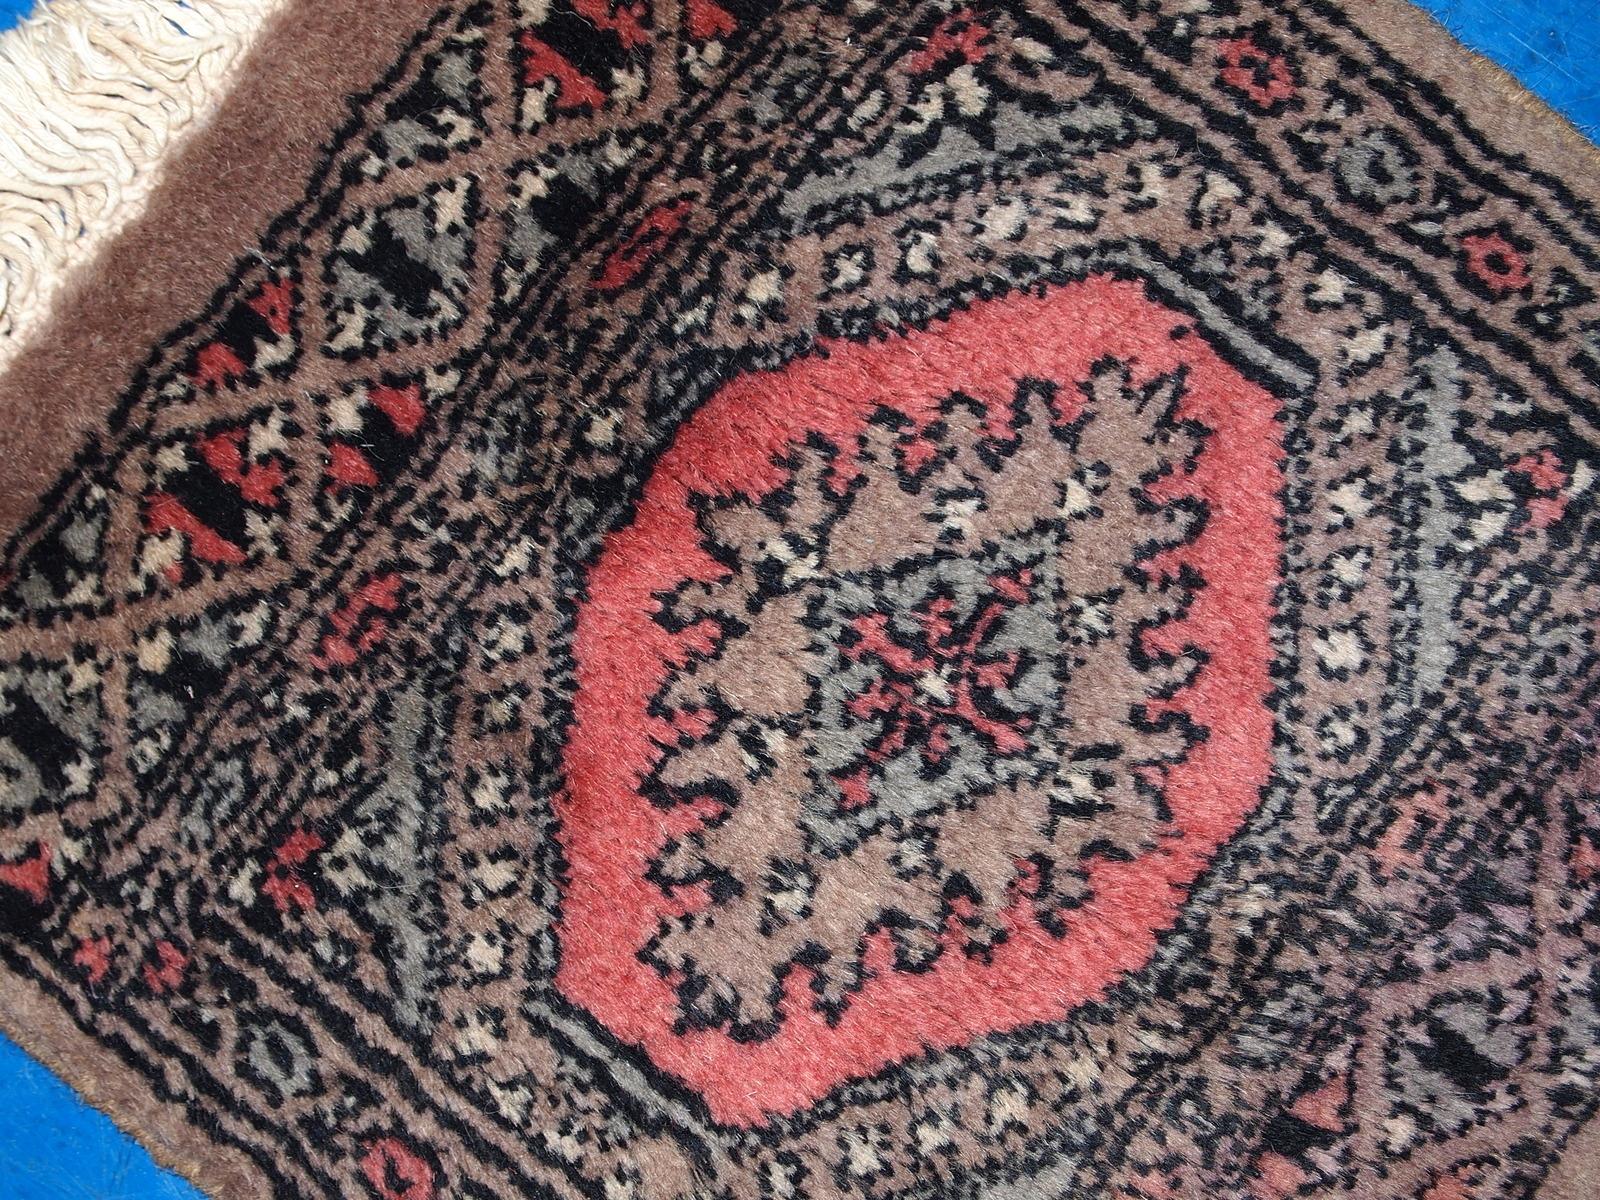 Vintage handmade Uzbek Bukhara praying mat in original good condition. The rug is from the end of 20th century.

-condition: origial good, 

-circa: 1960s,

-size: 1' x 1' (31cm x 33cm),

-material: wool,

-country of origin: